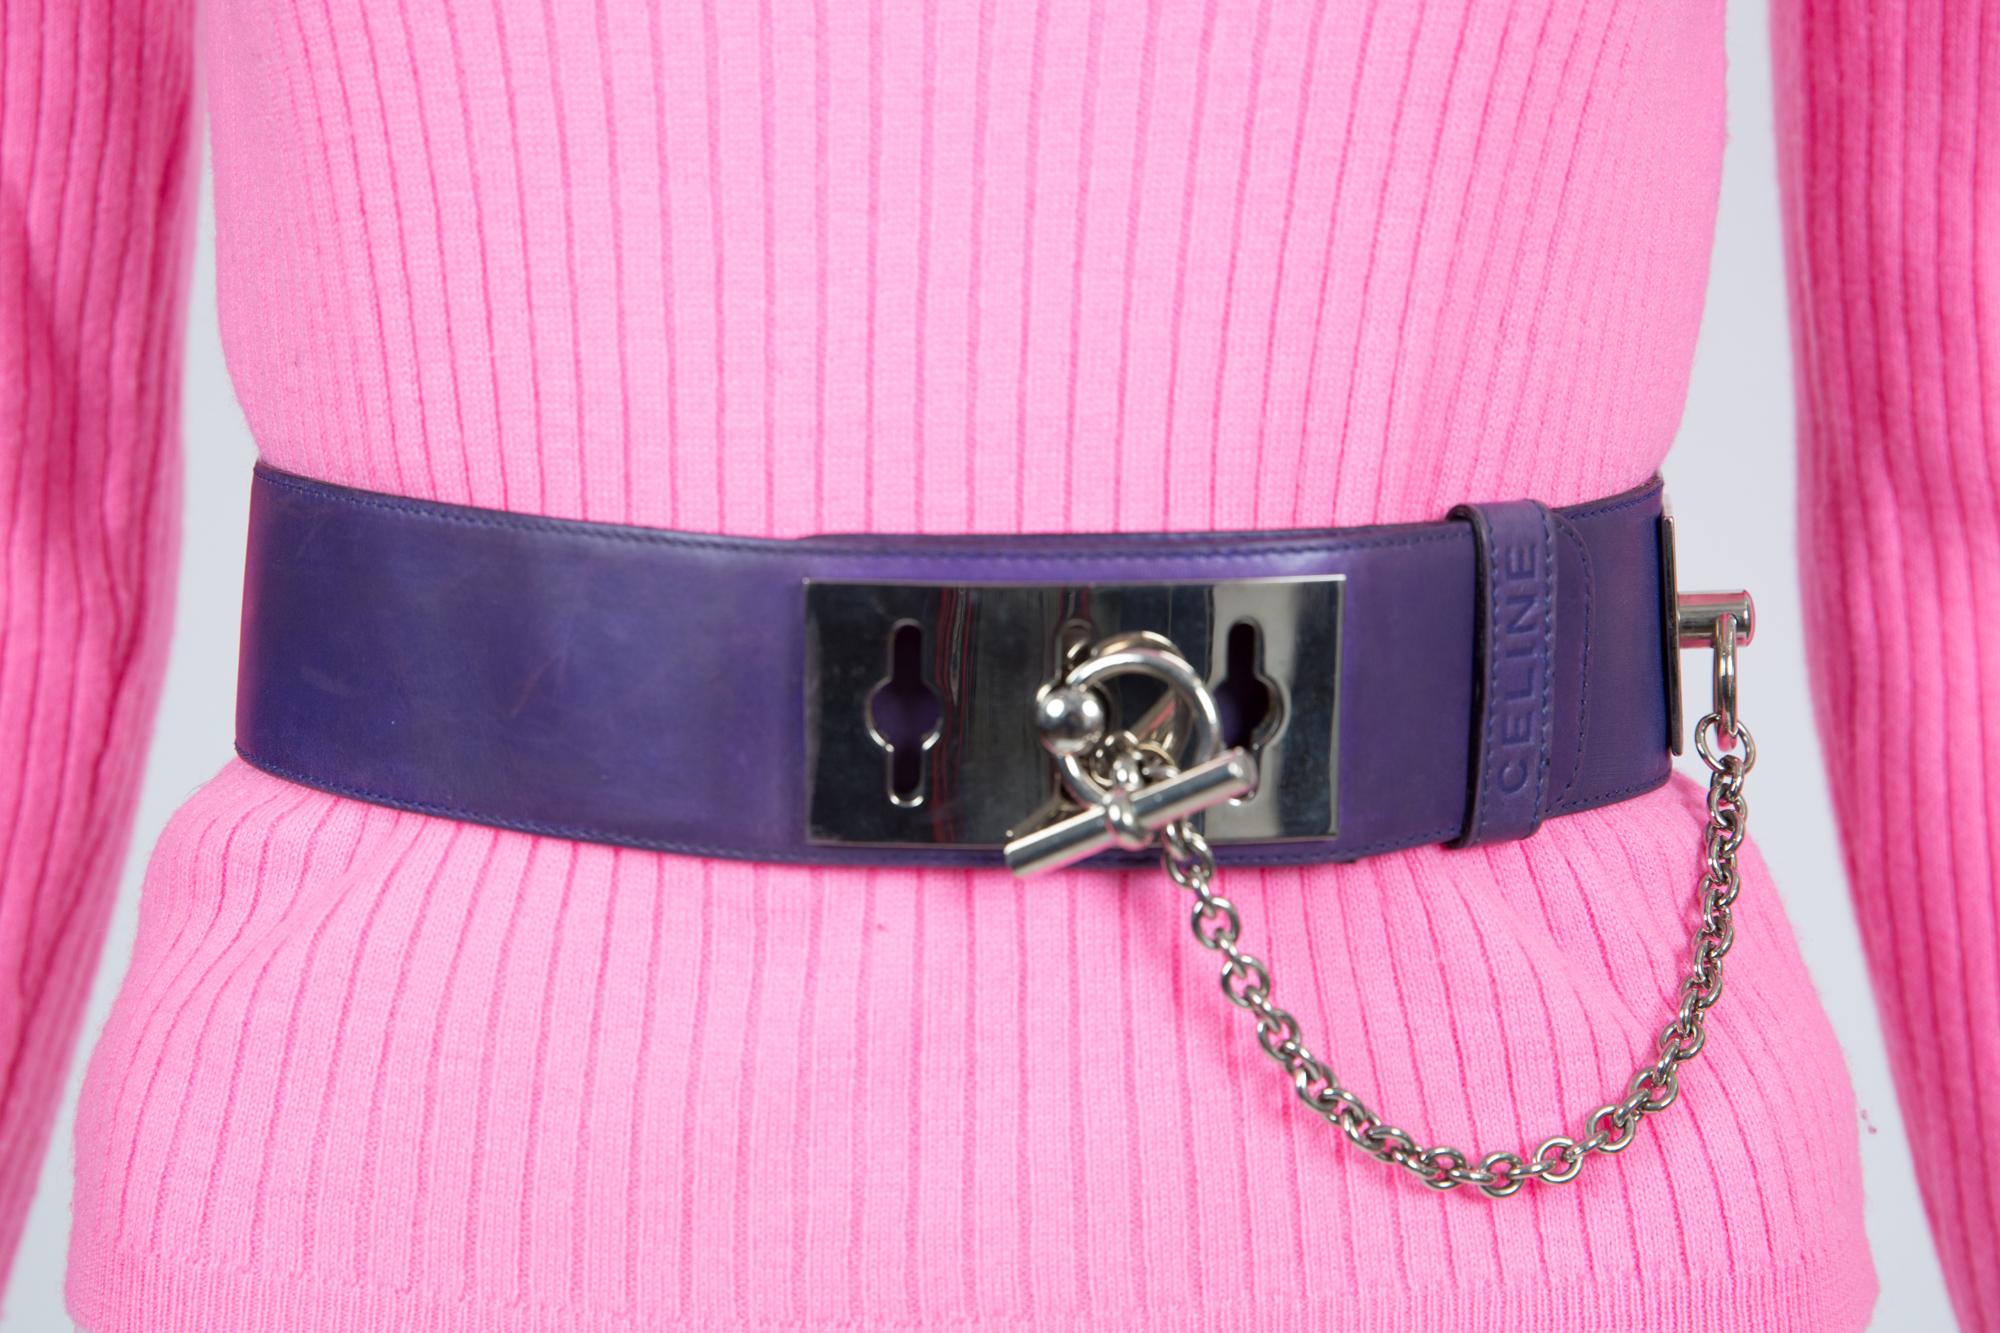 Celine large purple leather belt featuring a toggle waist chain detail, silver-tone hardware, a logo pitted on the loop, an inside logo stamp. 
Size stamp: 65
Circa:2000s
Length Maxi: 32.2in. (82cm)
Widtht: 1.9in. (5cm)
In good vintage condition.